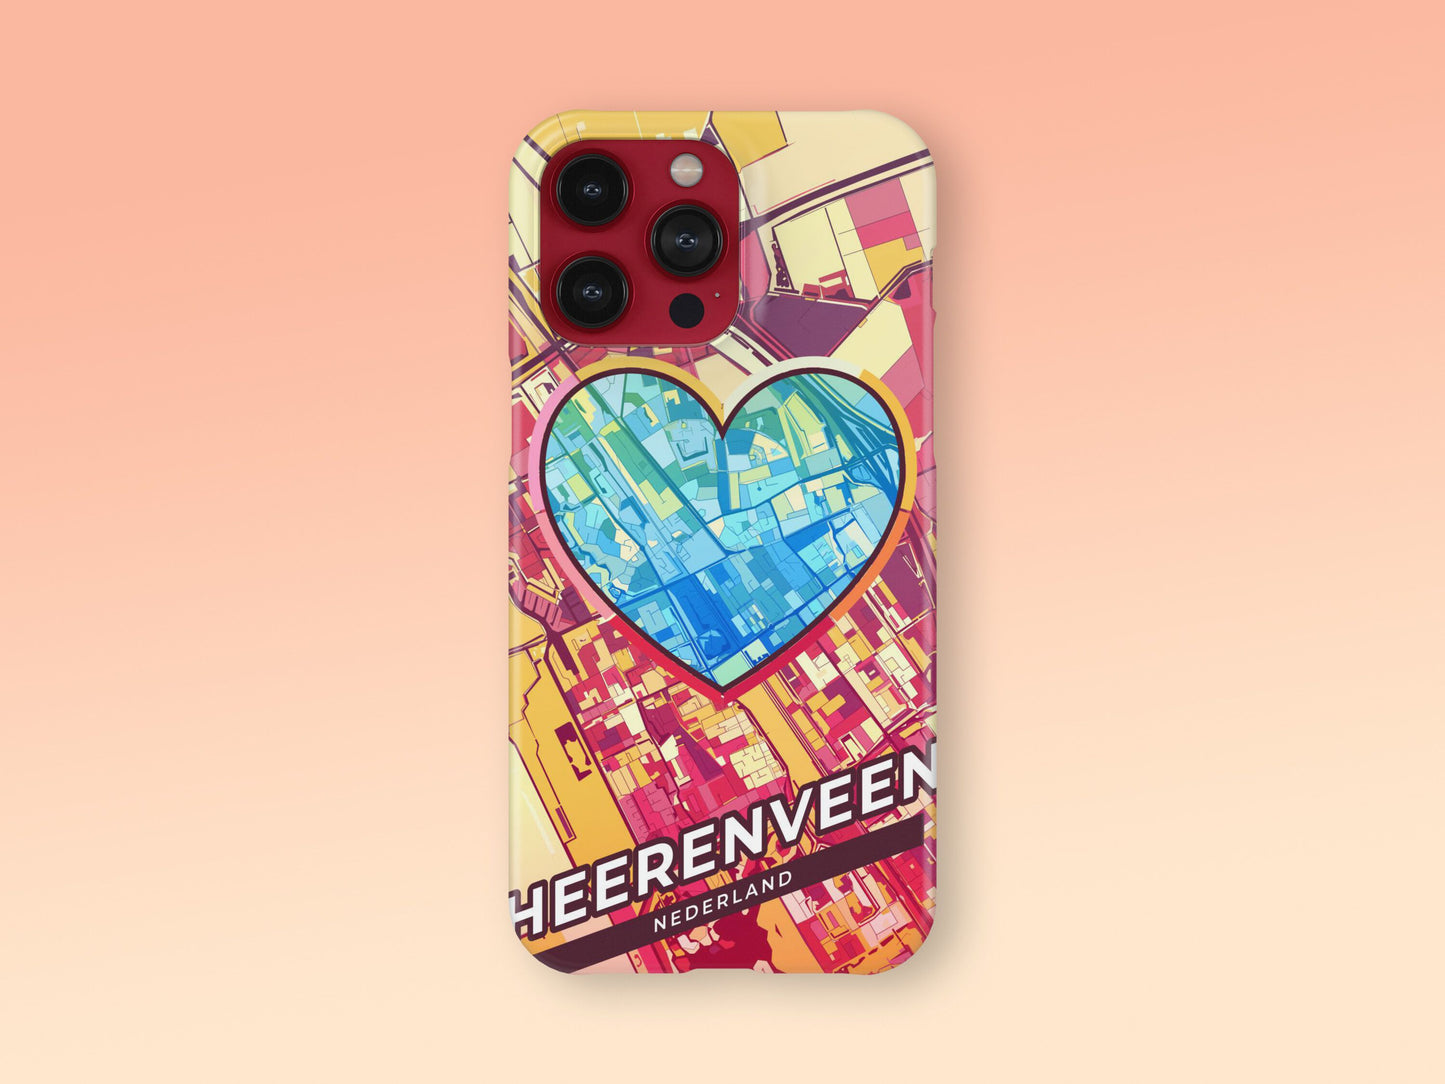 Heerenveen Netherlands slim phone case with colorful icon. Birthday, wedding or housewarming gift. Couple match cases. 2